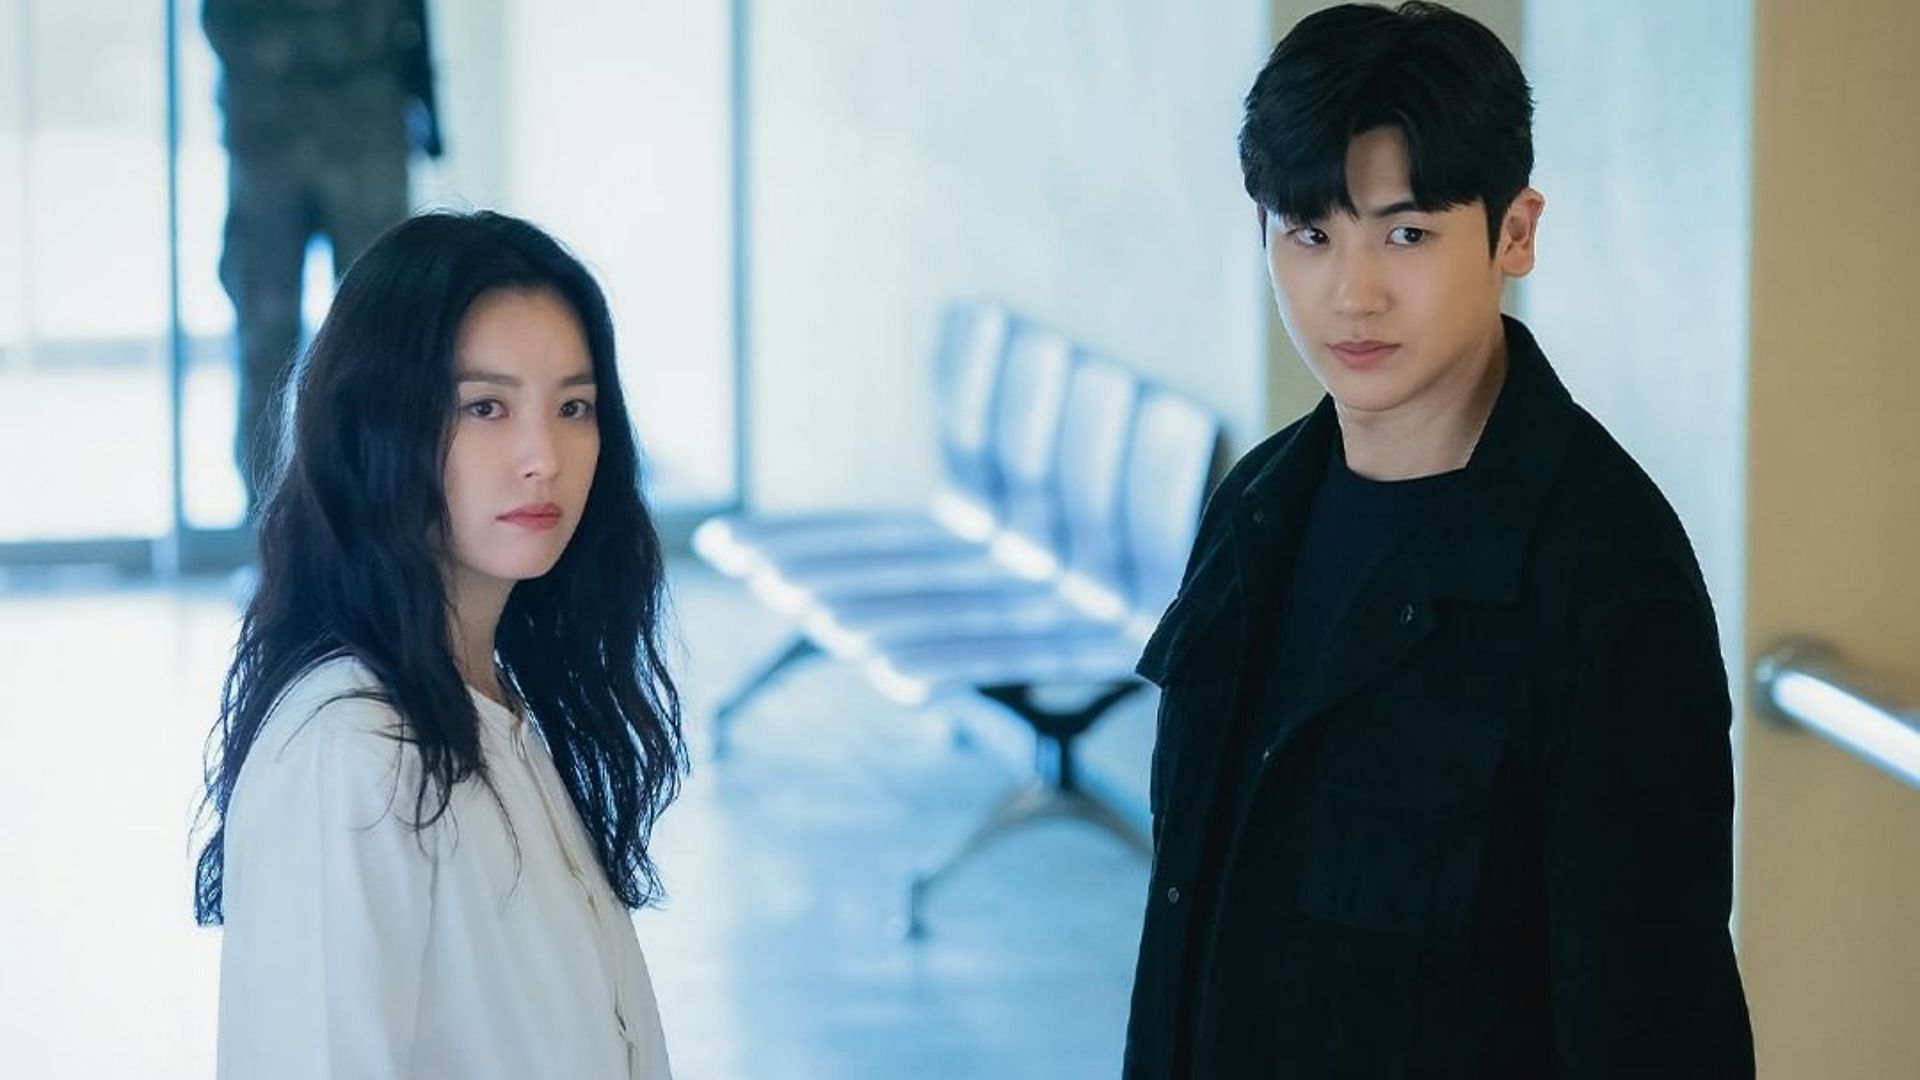 Happiness Episode 7: Release Date, Spoilers & Where to Watch